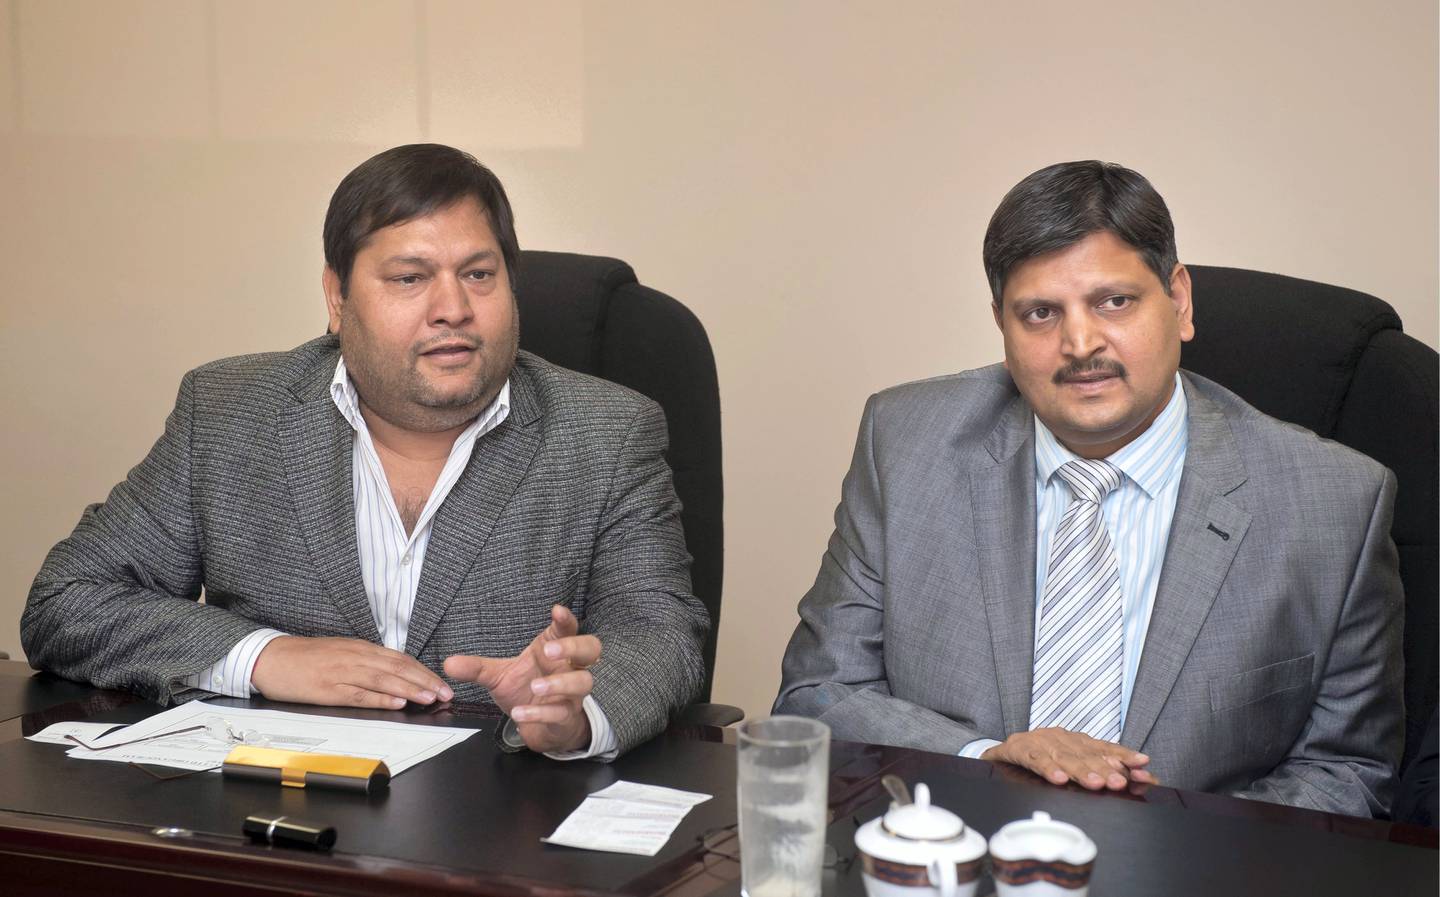 JOHANNESBURG, SOUTH AFRICA - MARCH 2, 2011: Indian businessmen, Ajay Gupta and younger brother Atul Gupta have a one-on-one interview with Business Day in Johannesburg, South Africa on March 2, 2011 regarding their professional relationship.  (Photo by Gallo Images/Business Day/Martin Rhodes)